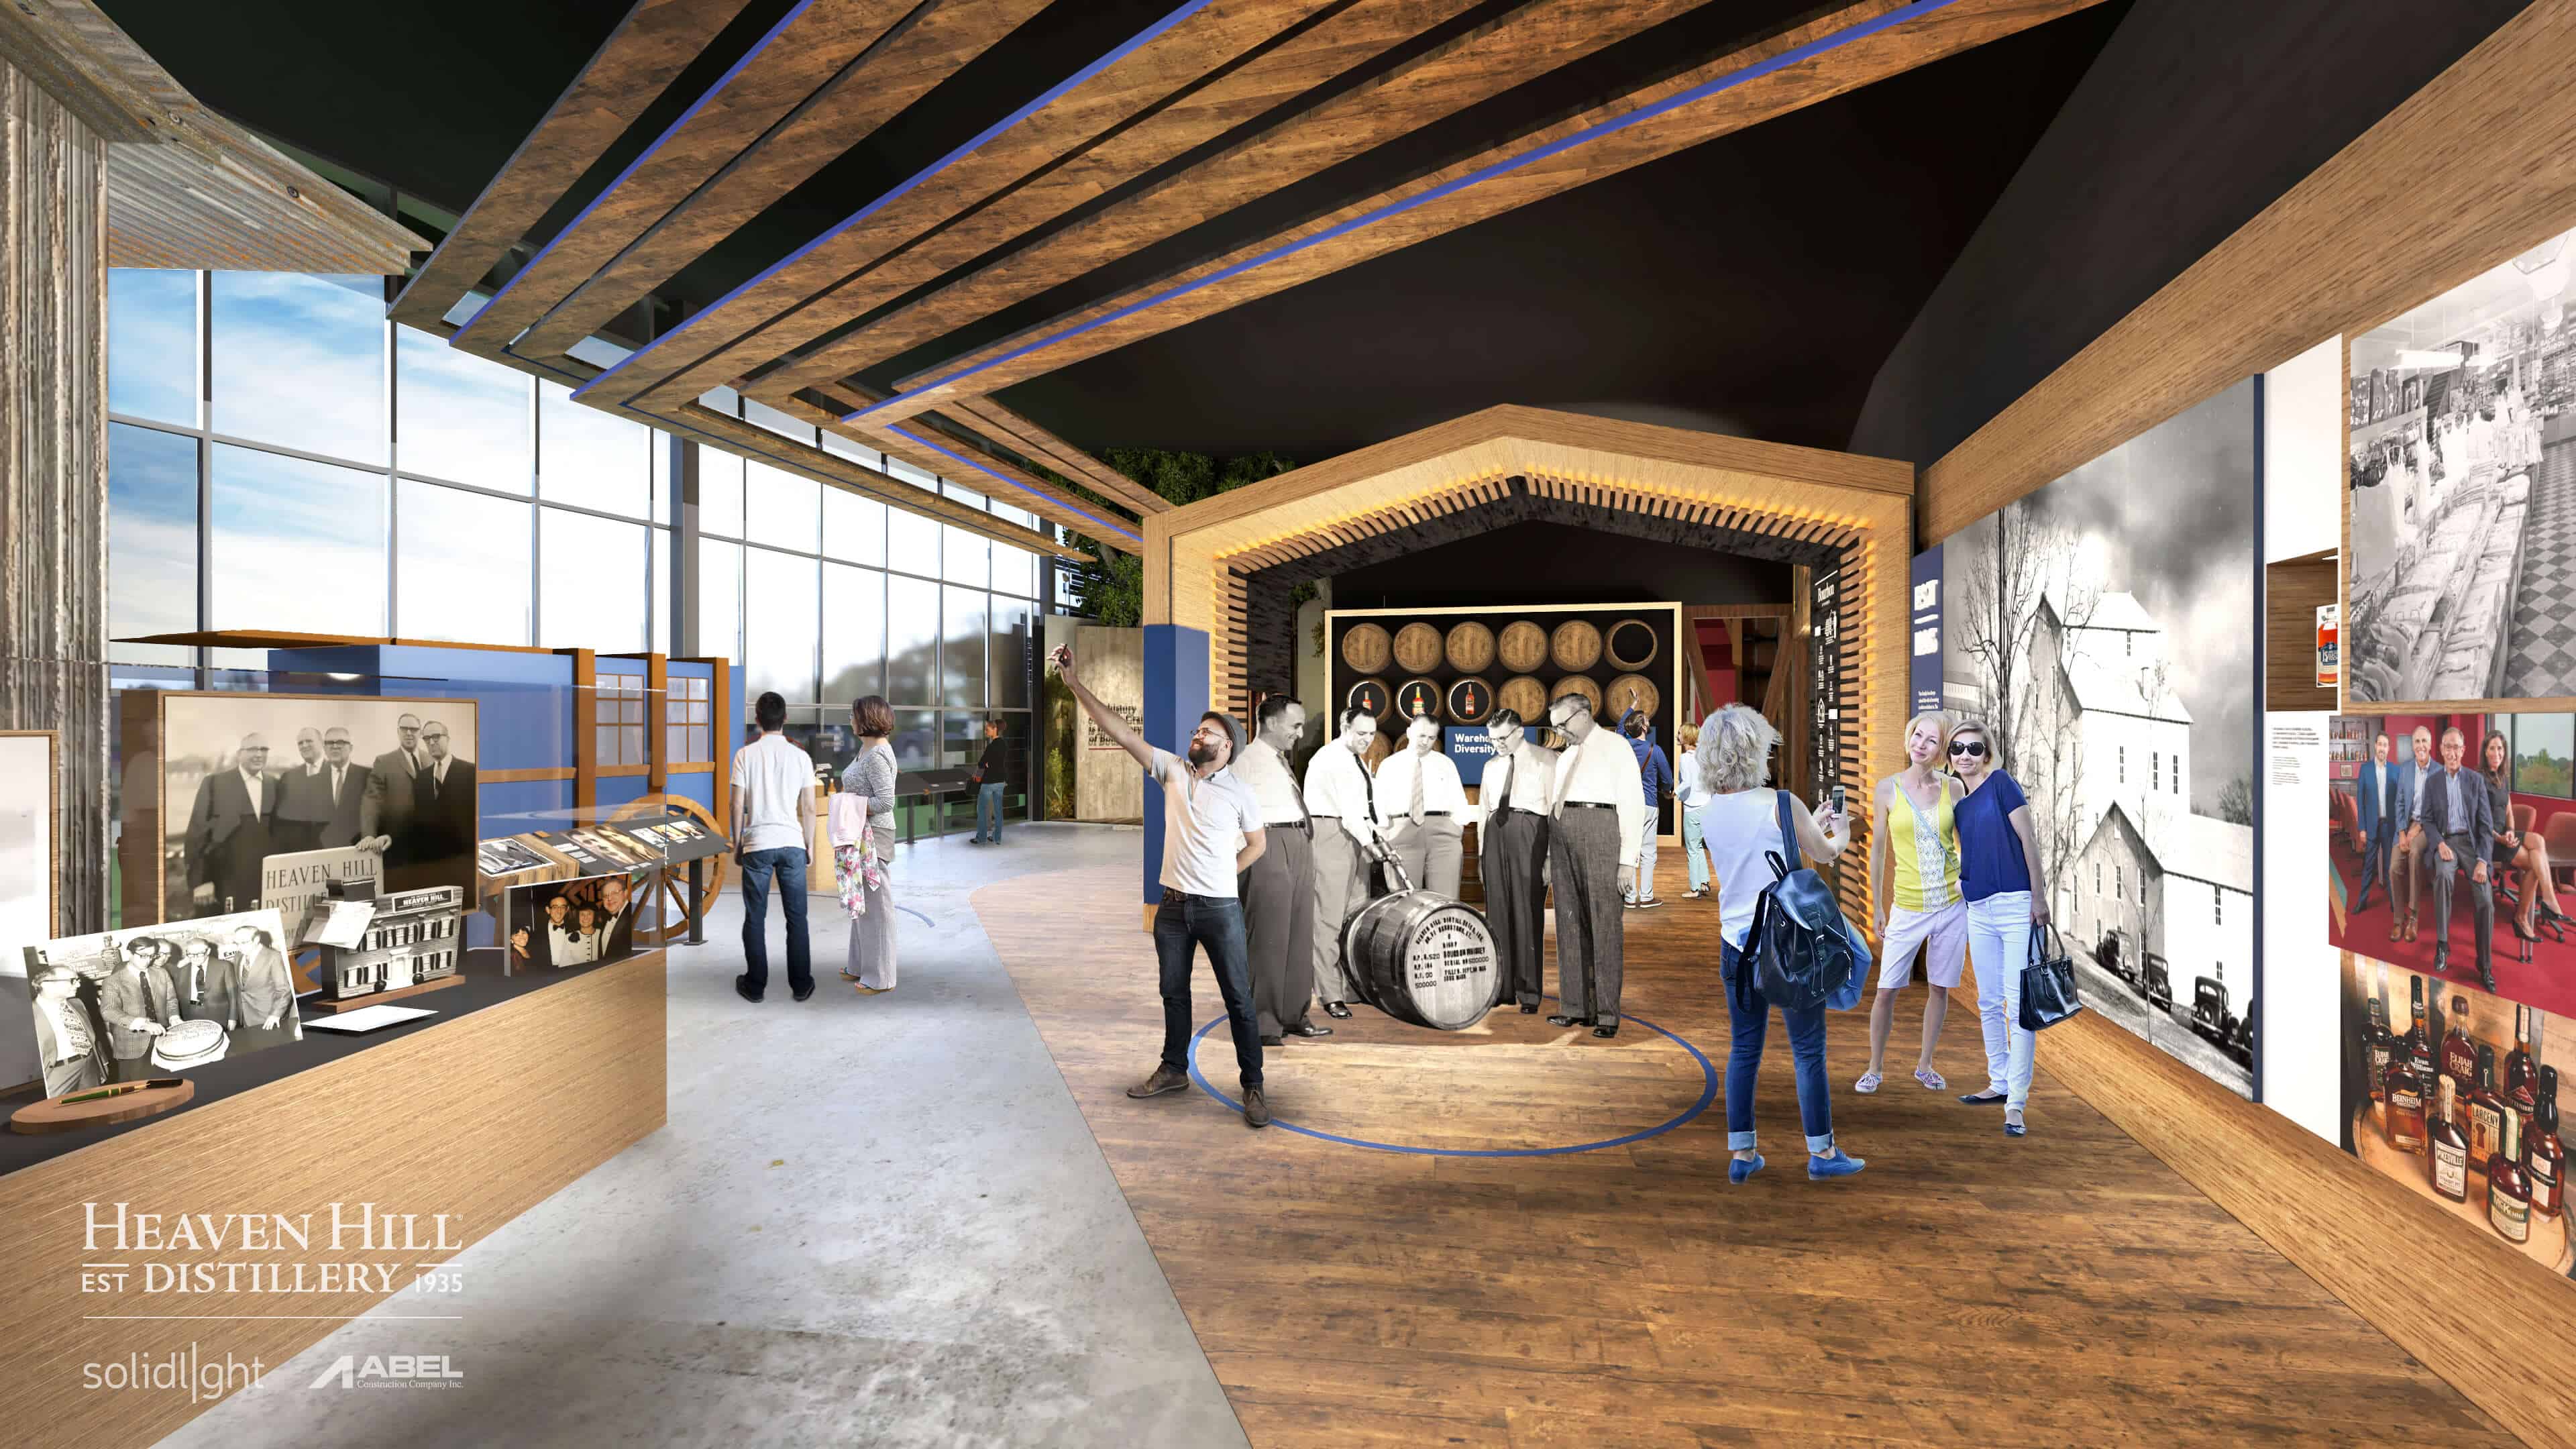 HHD VC Family Distillery - Heaven Hill Distillery Announces Multi-Million-Dollar Investment in Expansion of Bardstown Visitor Center, Production Facilities